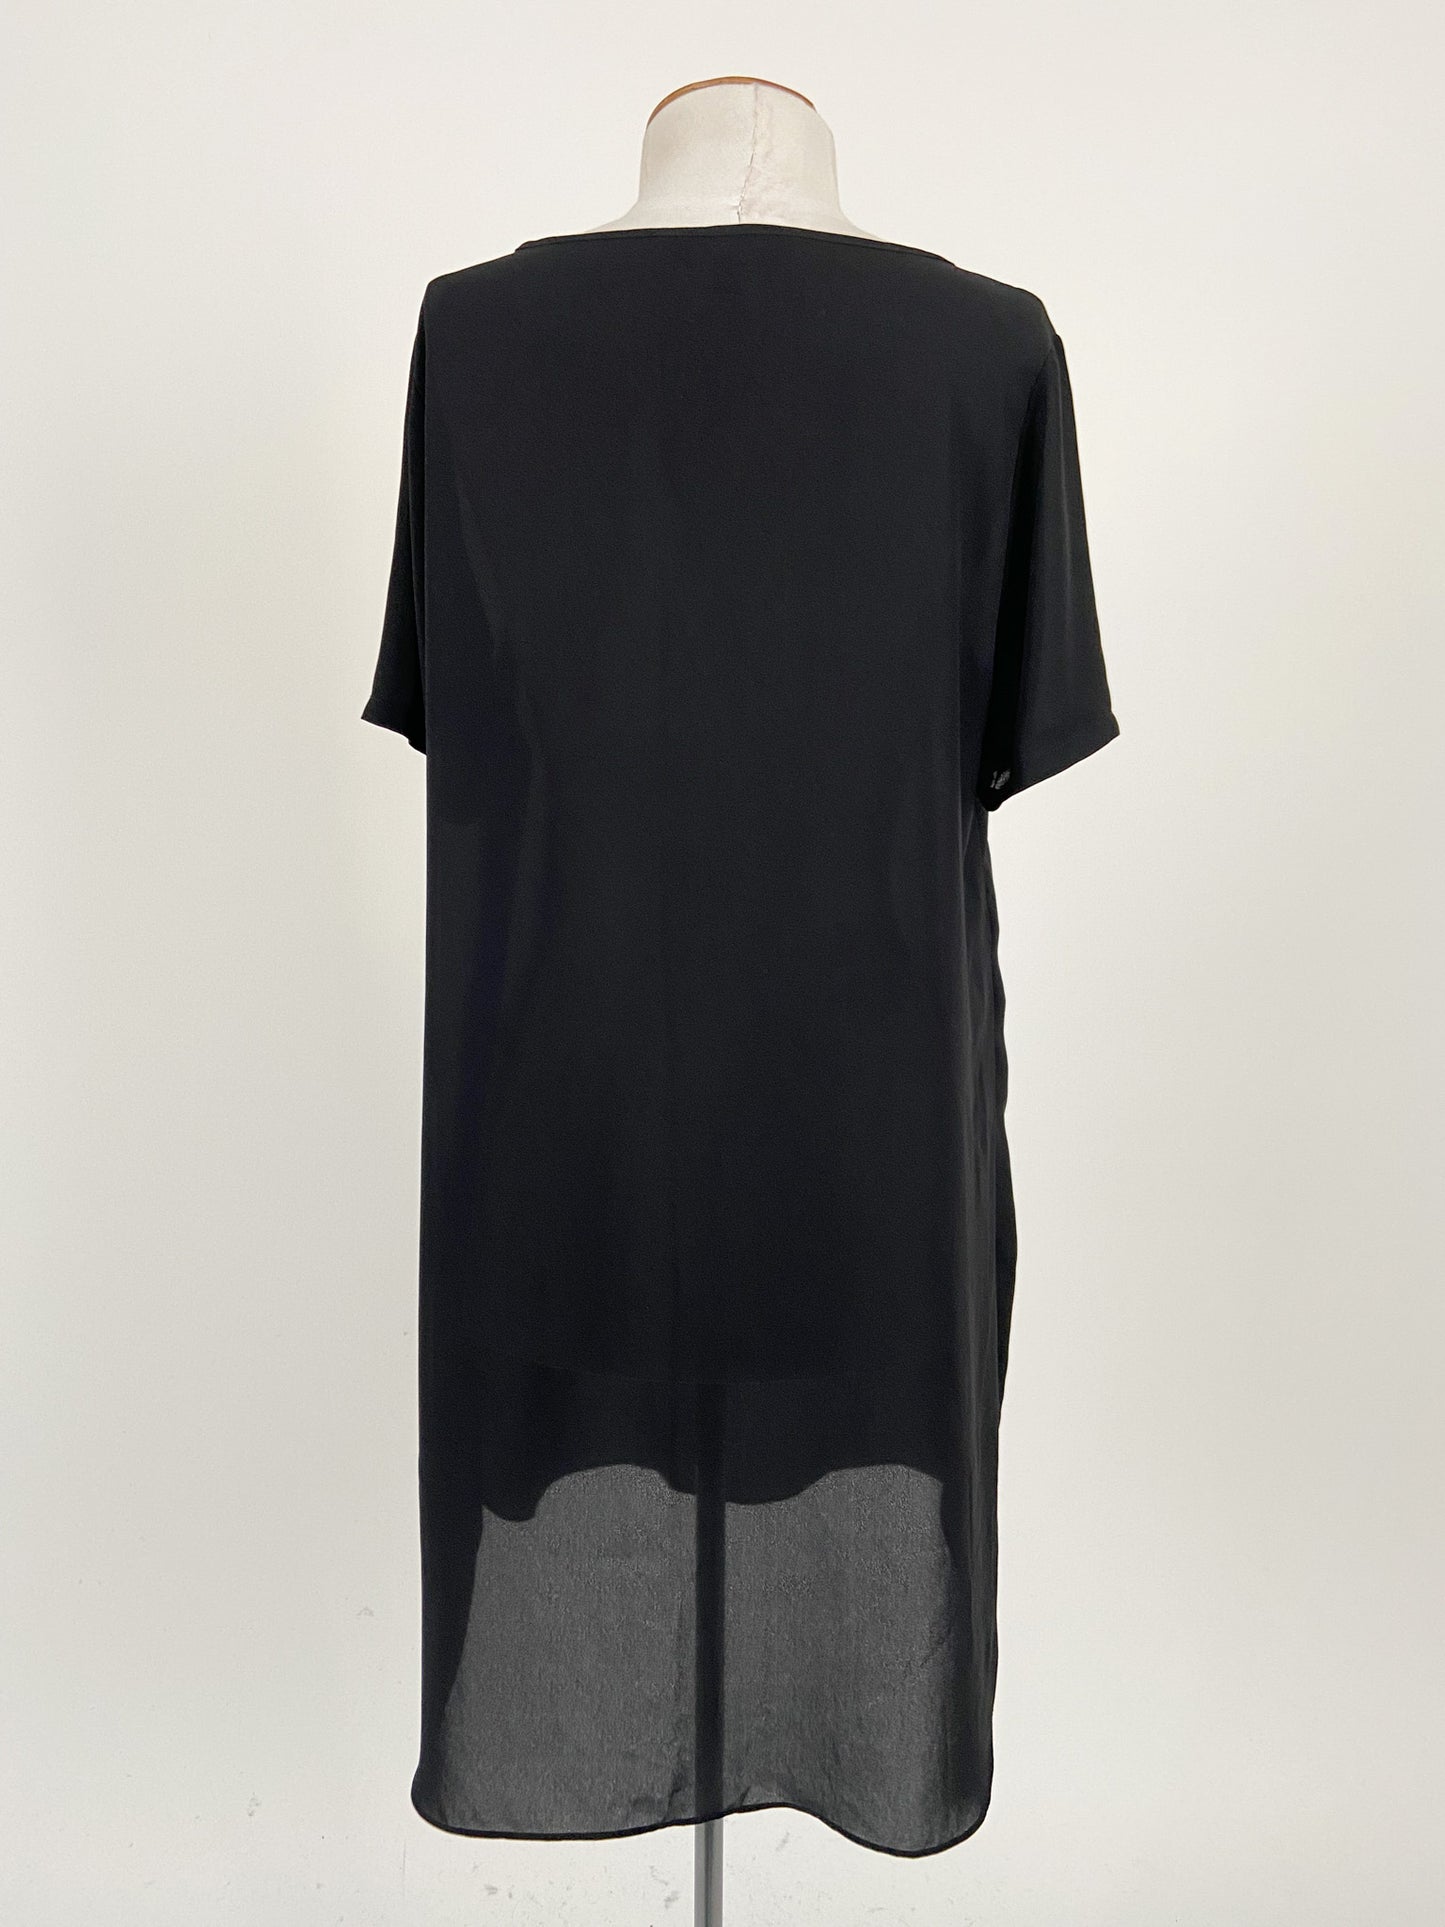 Glassons | Black Casual/Workwear Top | Size 10